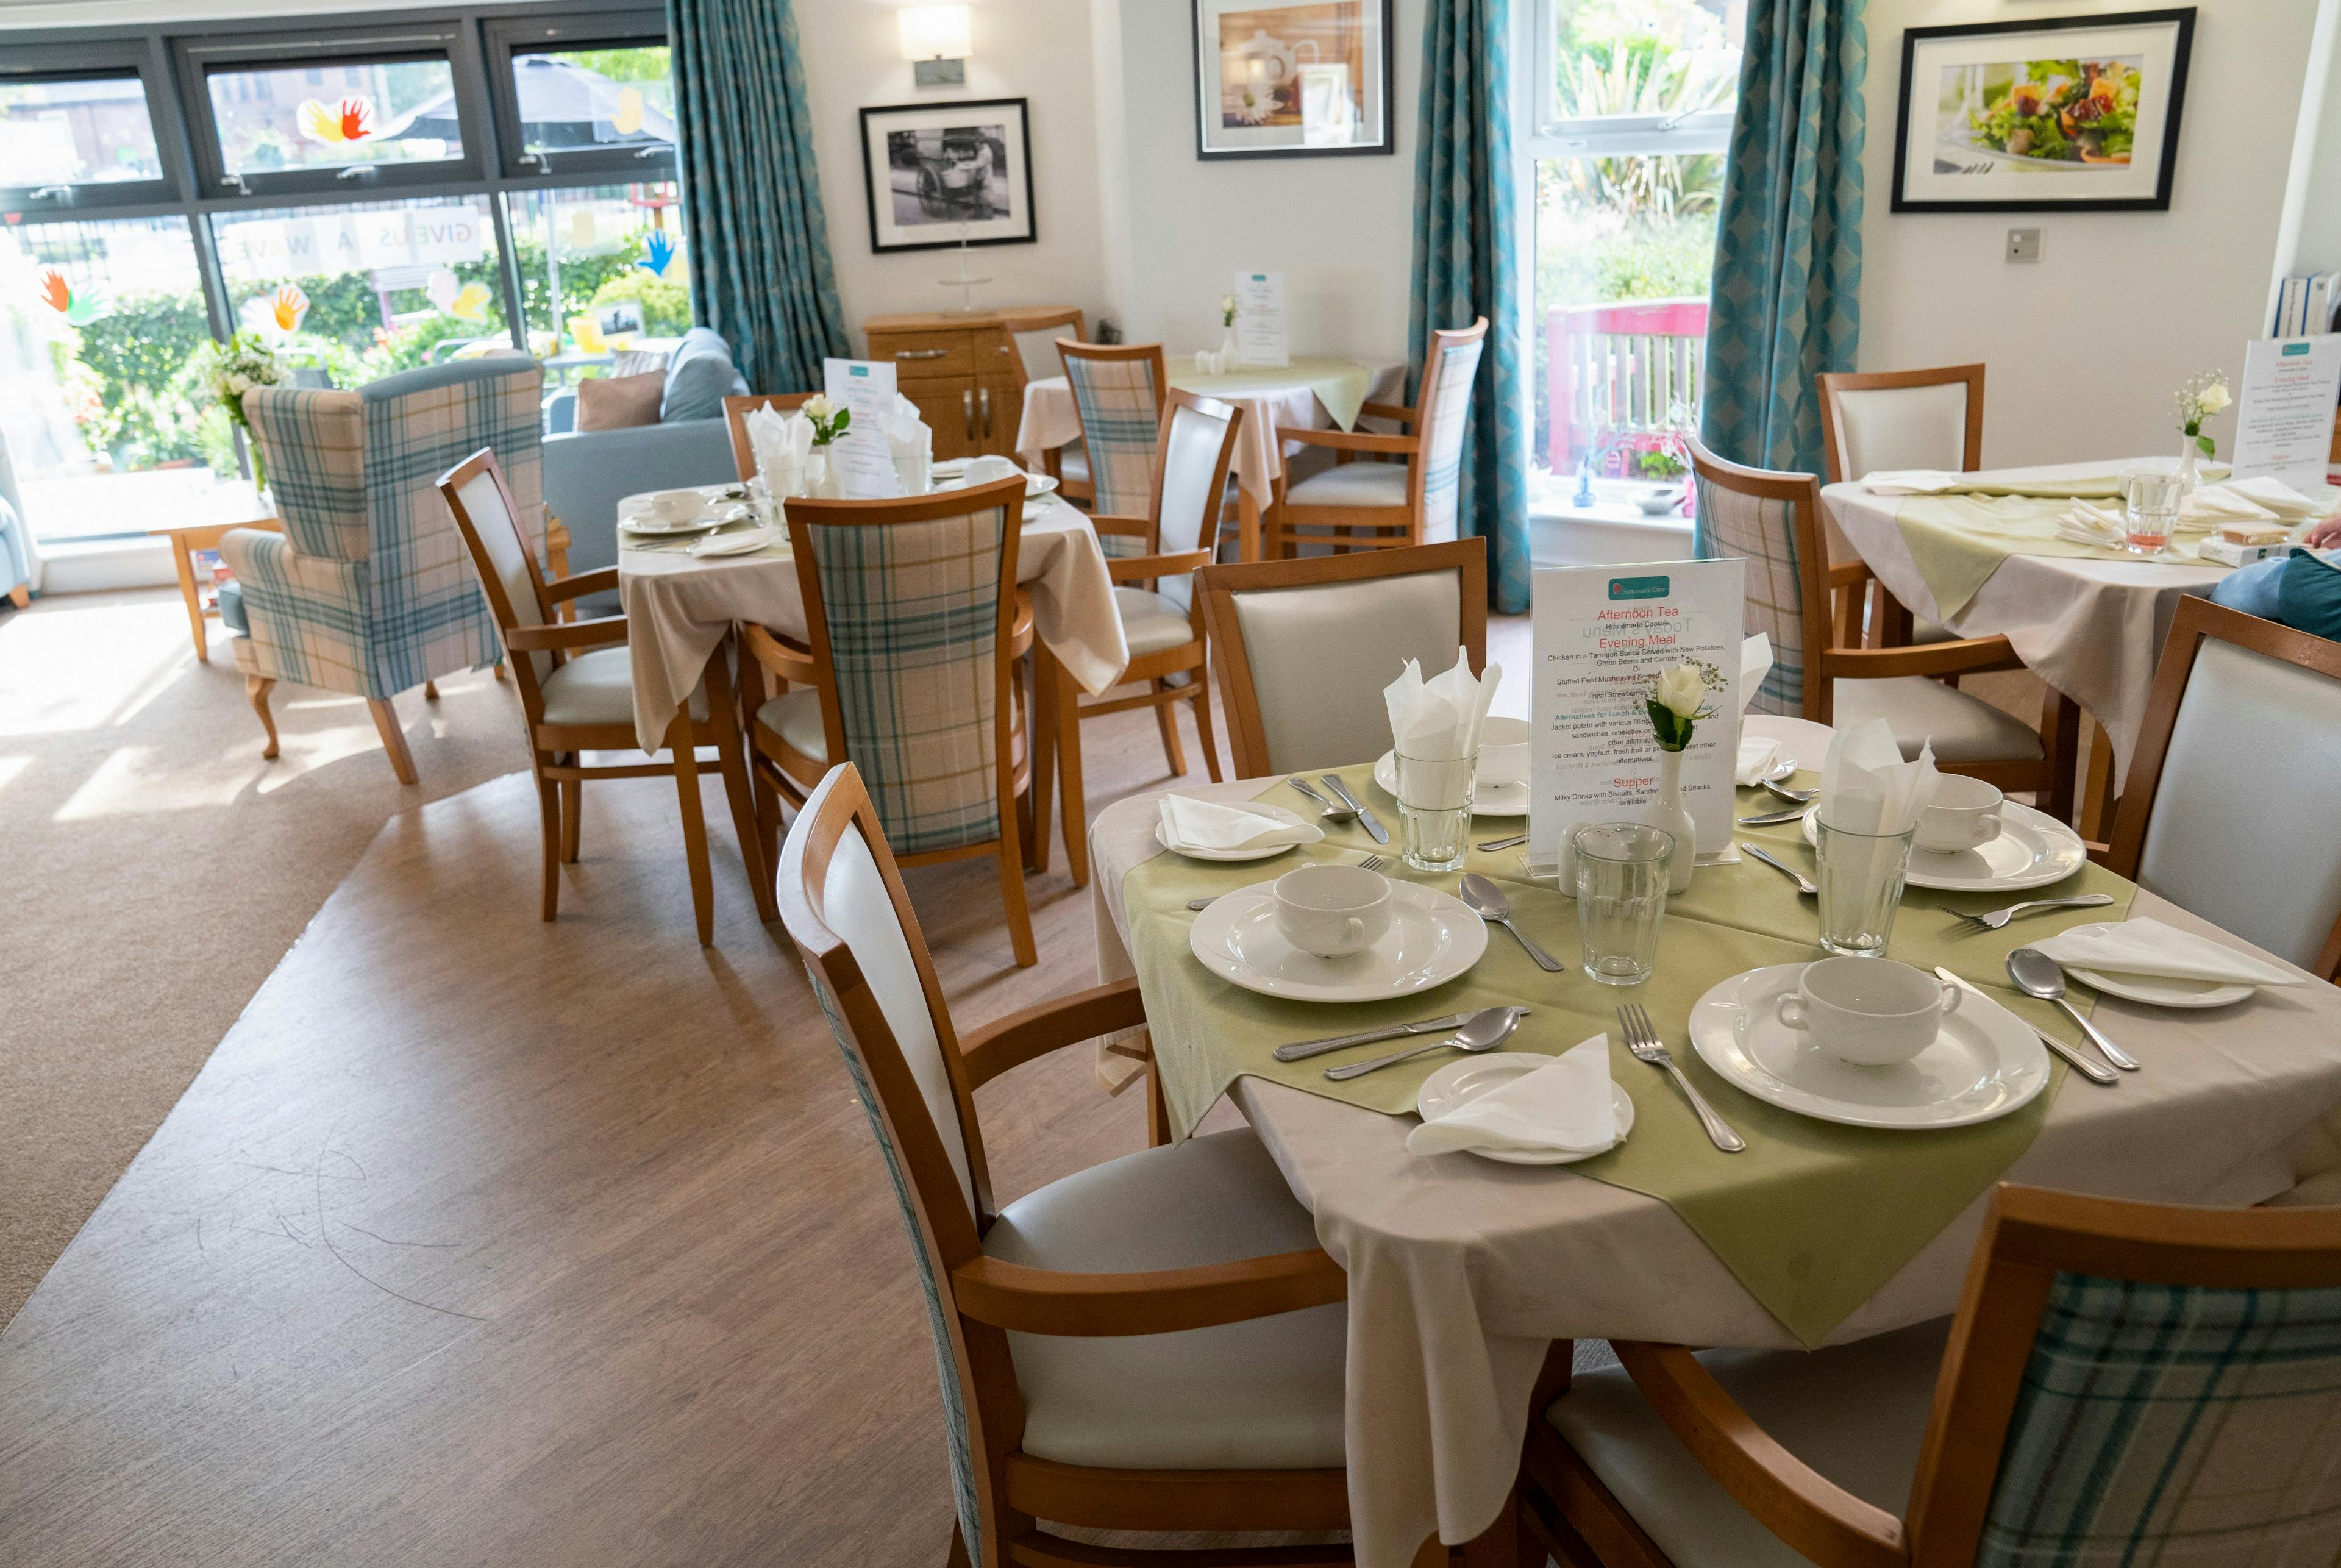 Dining Room at Castlecroft Care Home in Birmingham, West Midlands